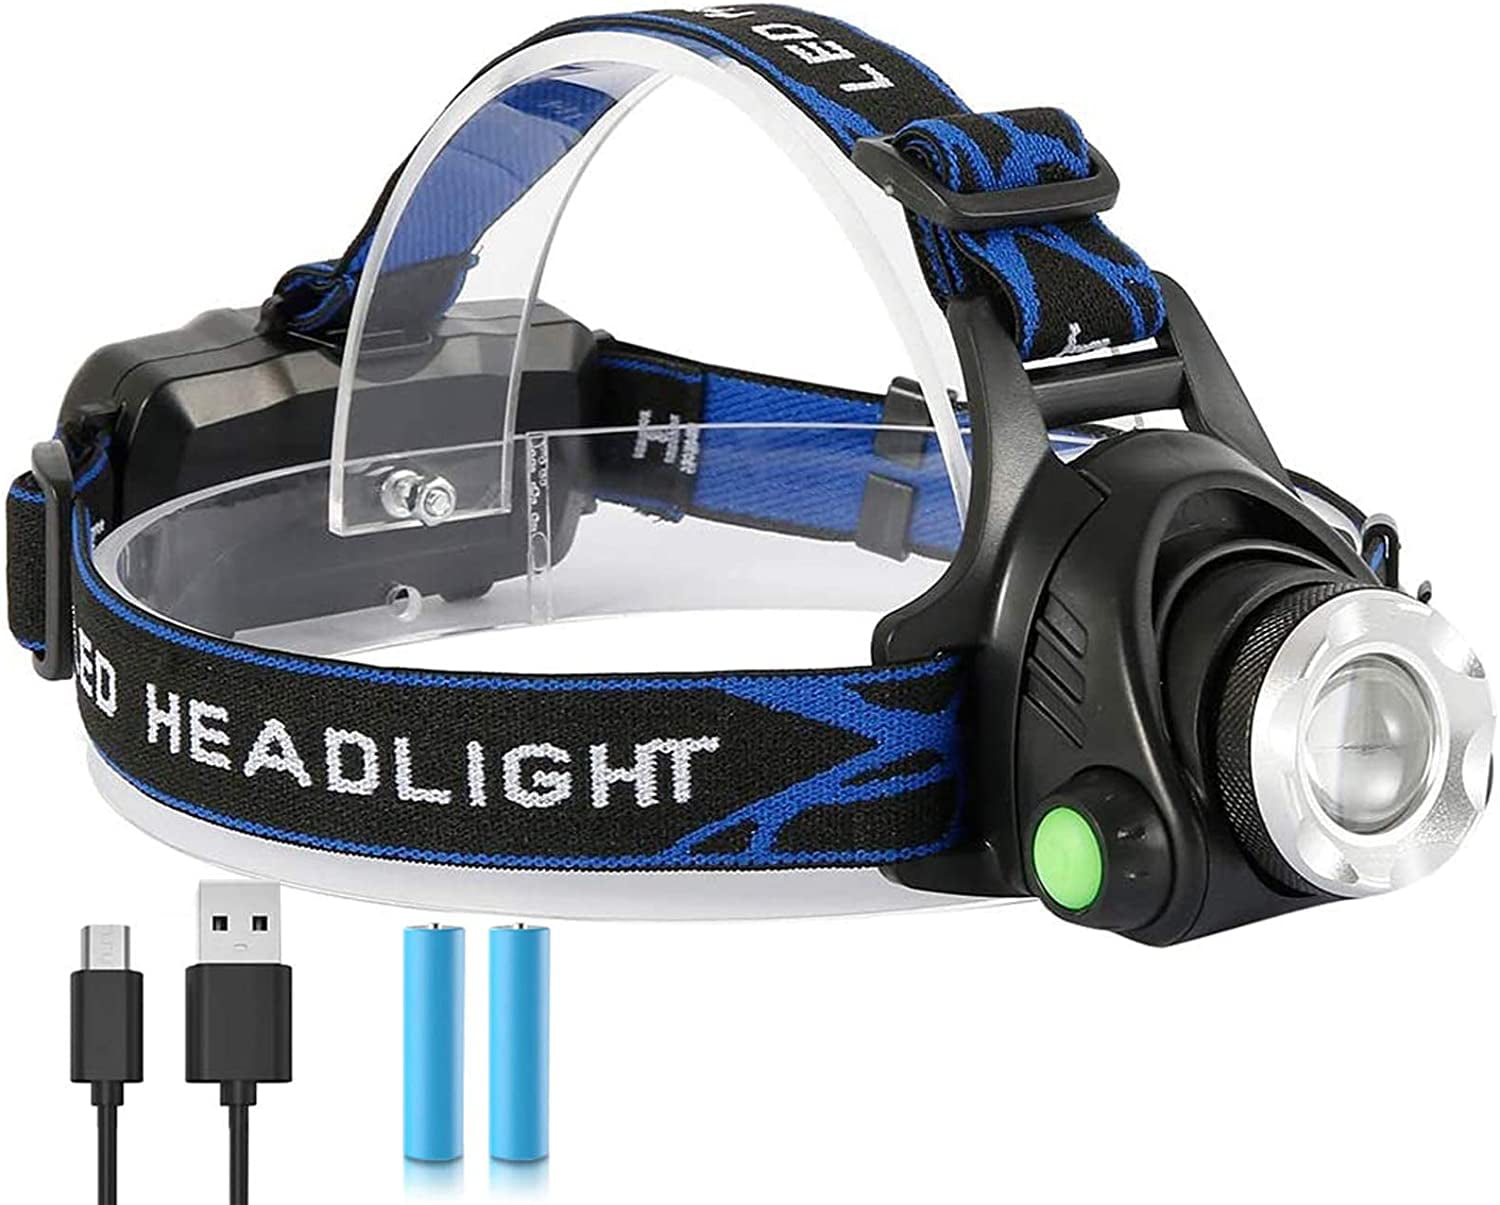 Headlamp Rechargeable Headlamp for Adults,USB Head Lamp with two 18650 Batteries，90° Adjustable IPX4 Waterproof Headlamp，4 Modes Lightweight Headlamps for Outdoor Camping Running Fishing 